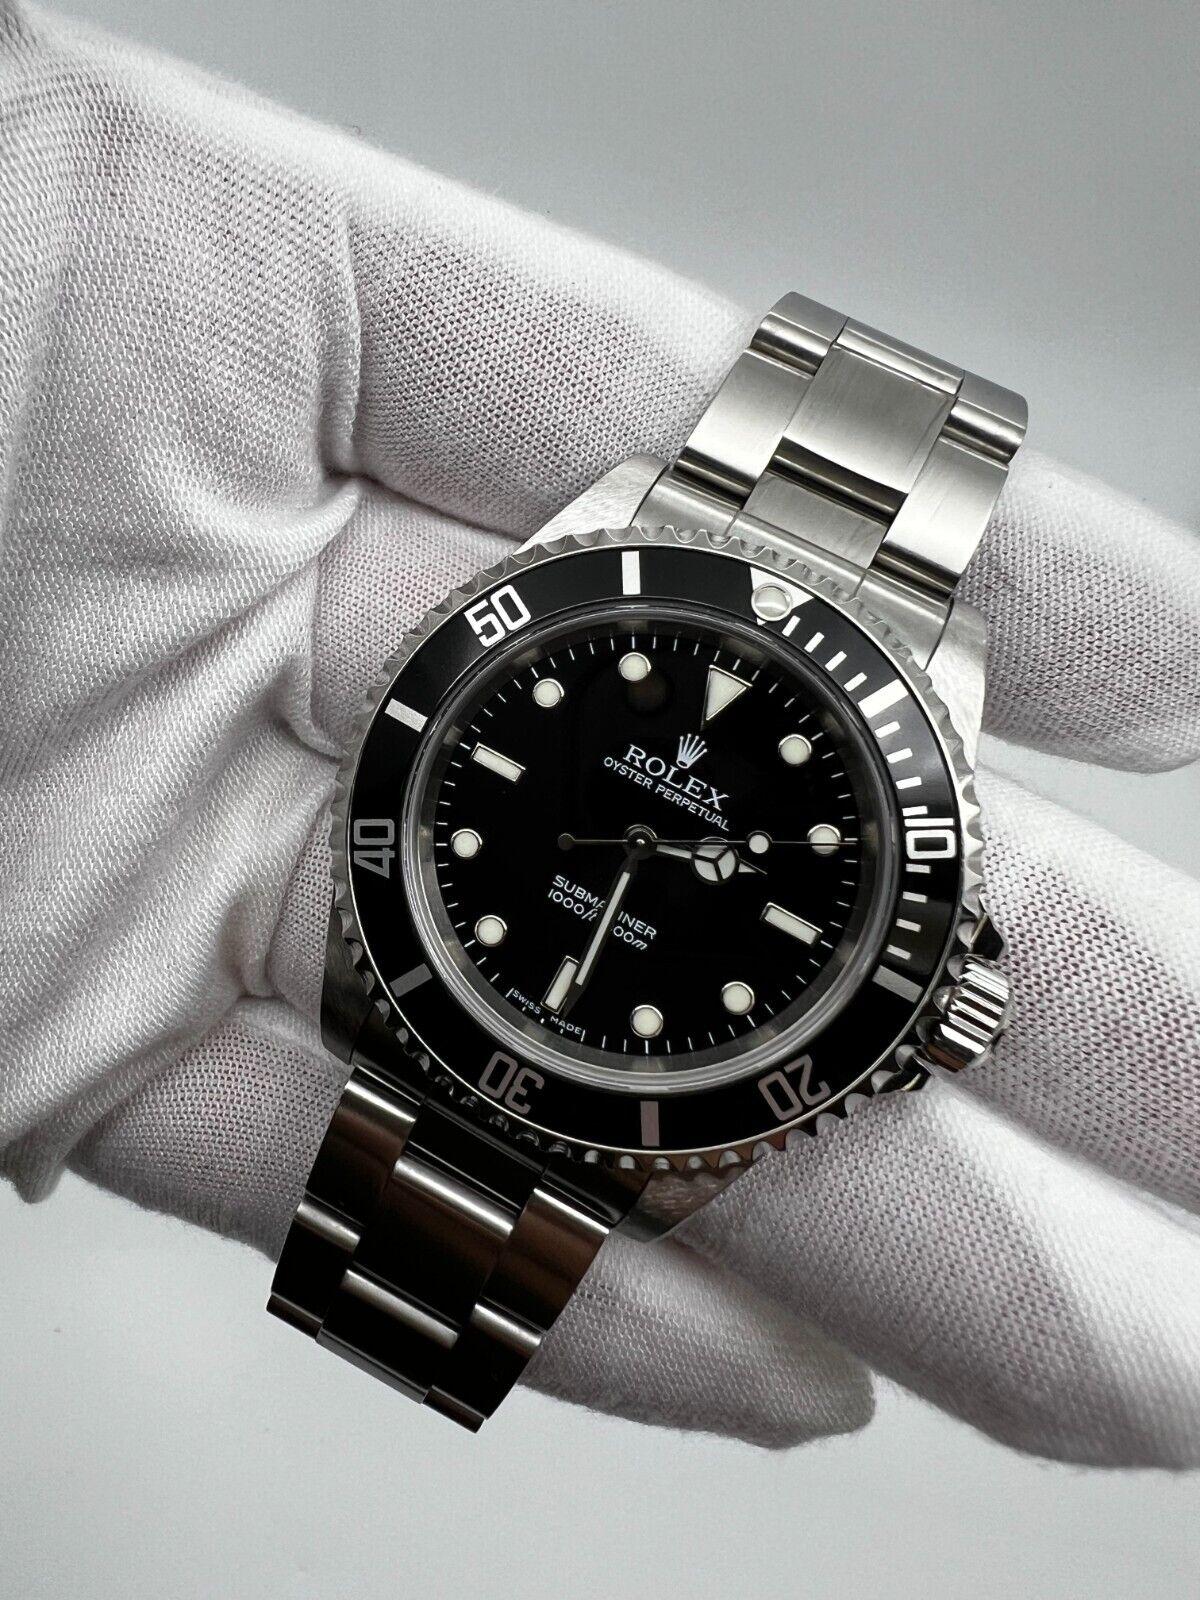 Rolex 14060 Submariner Black Dial Stainless Steel 2006 Box Paper For Sale 2